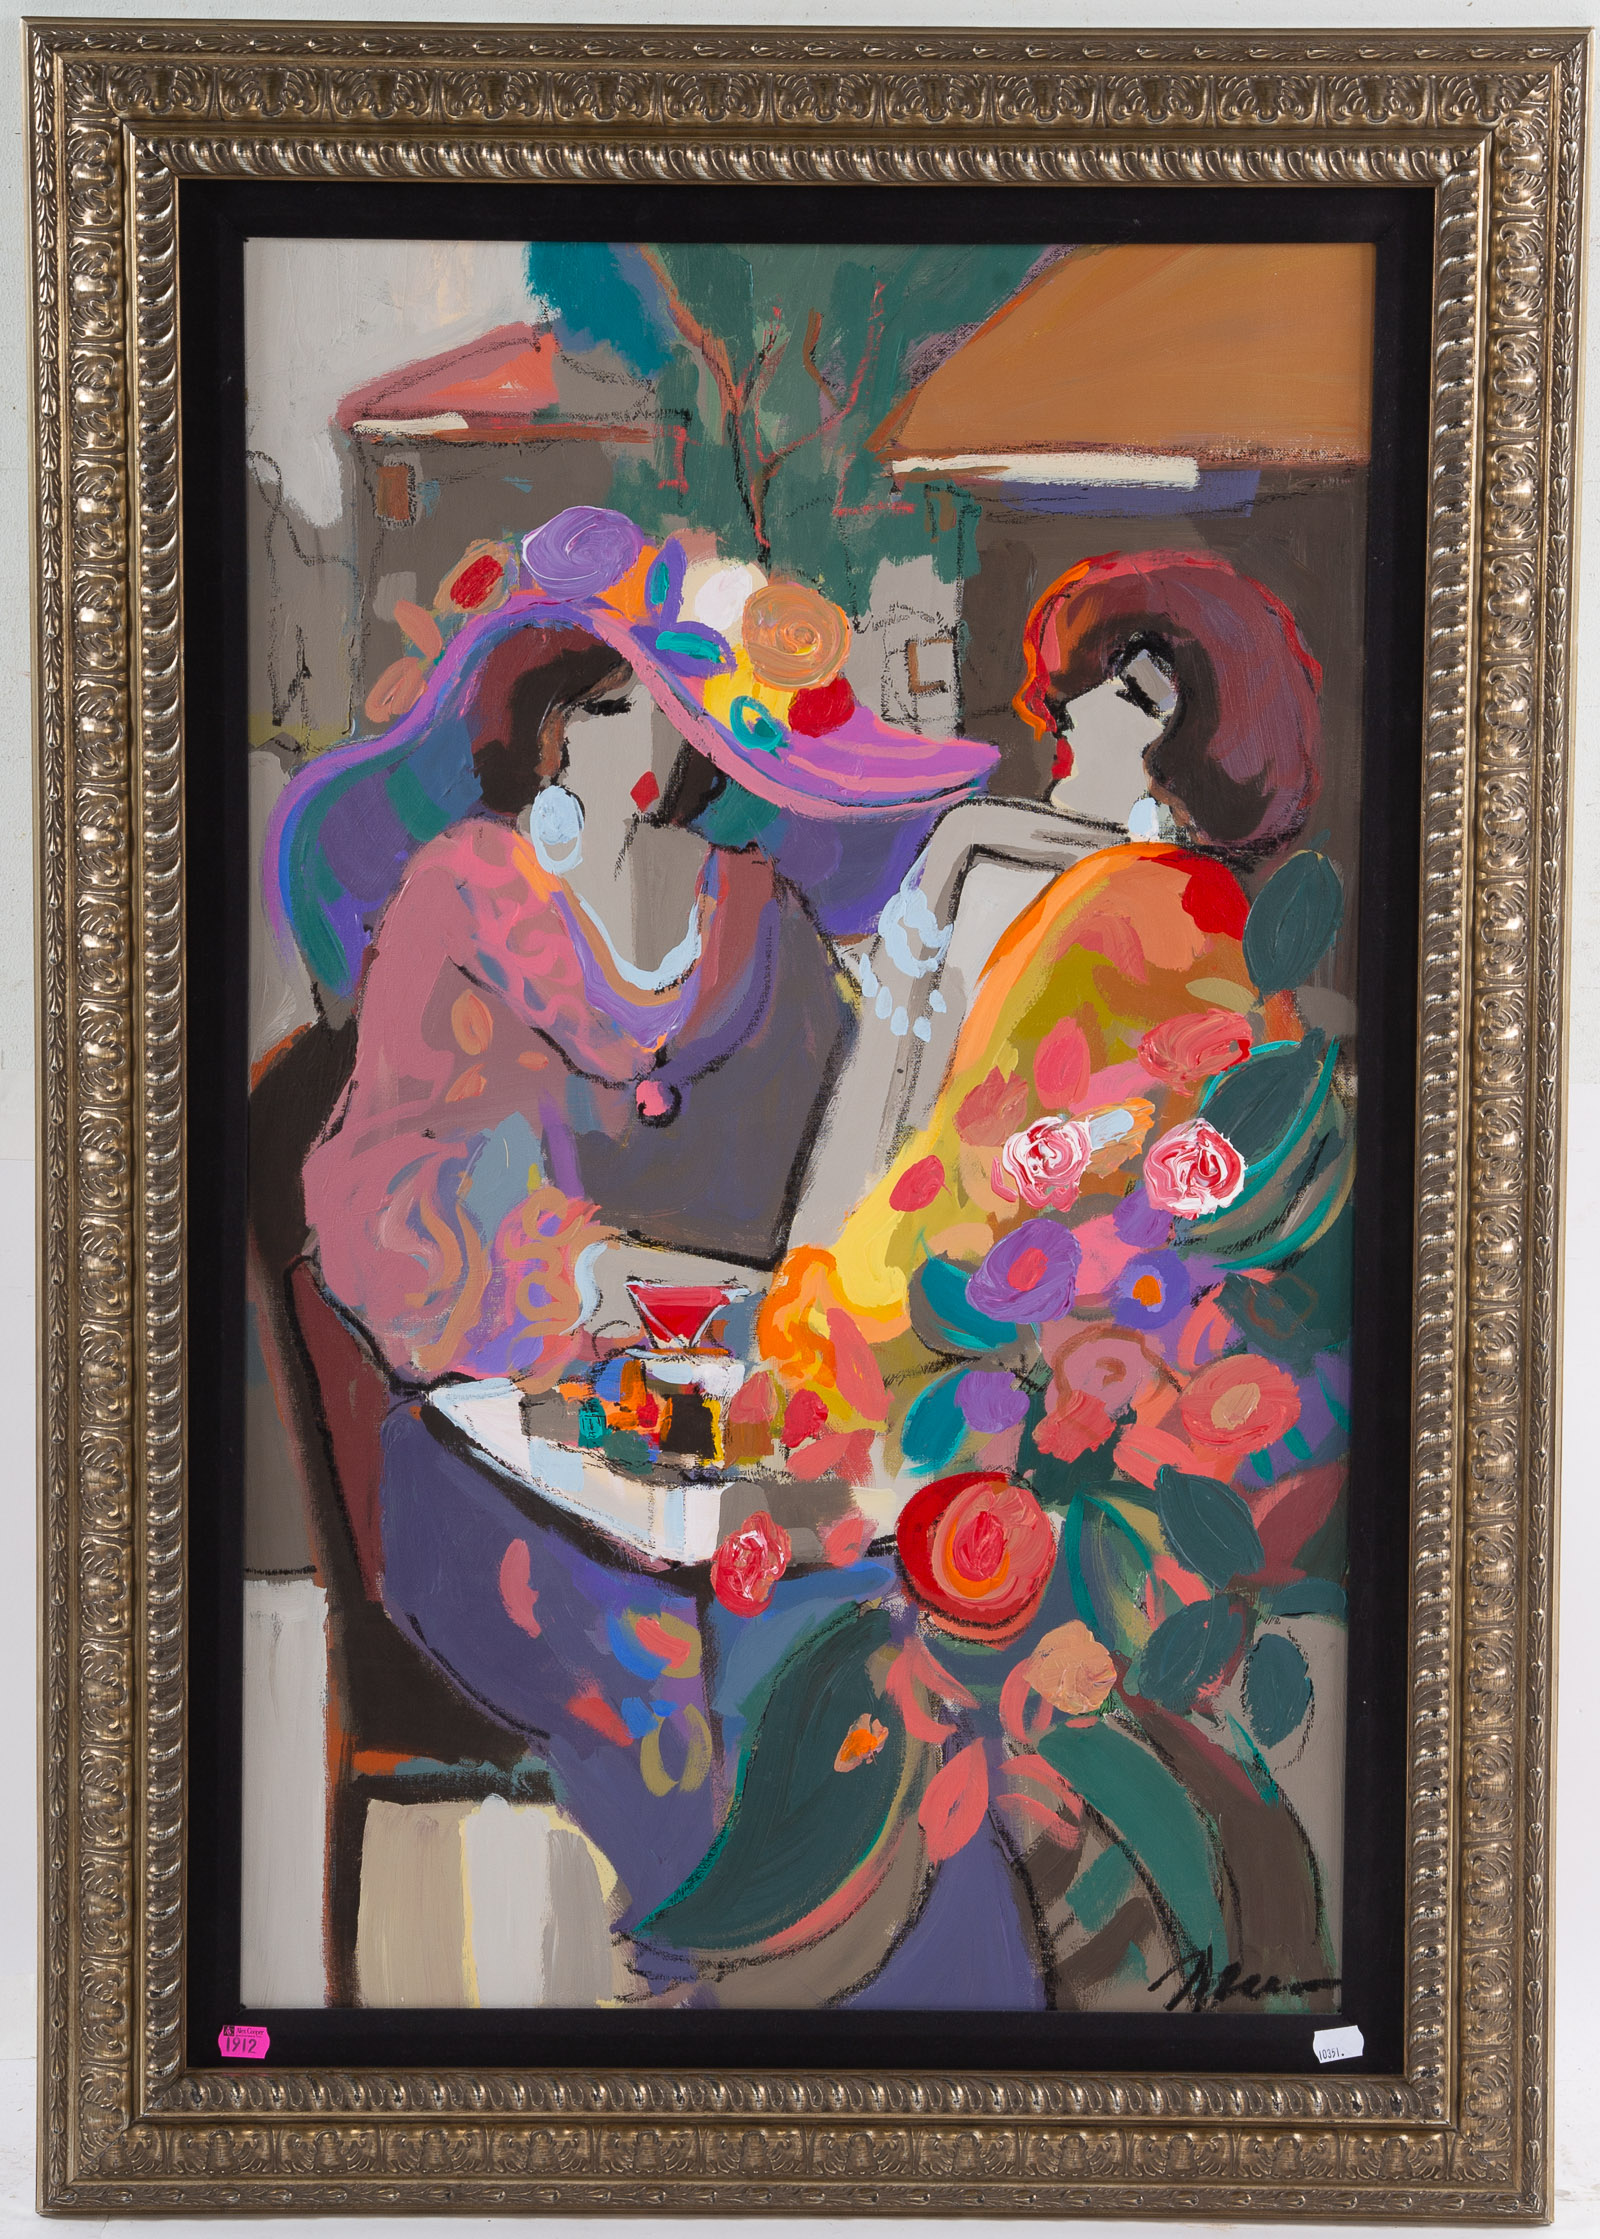 ISAAC MAIMON. "FLOWERS IN YOUR